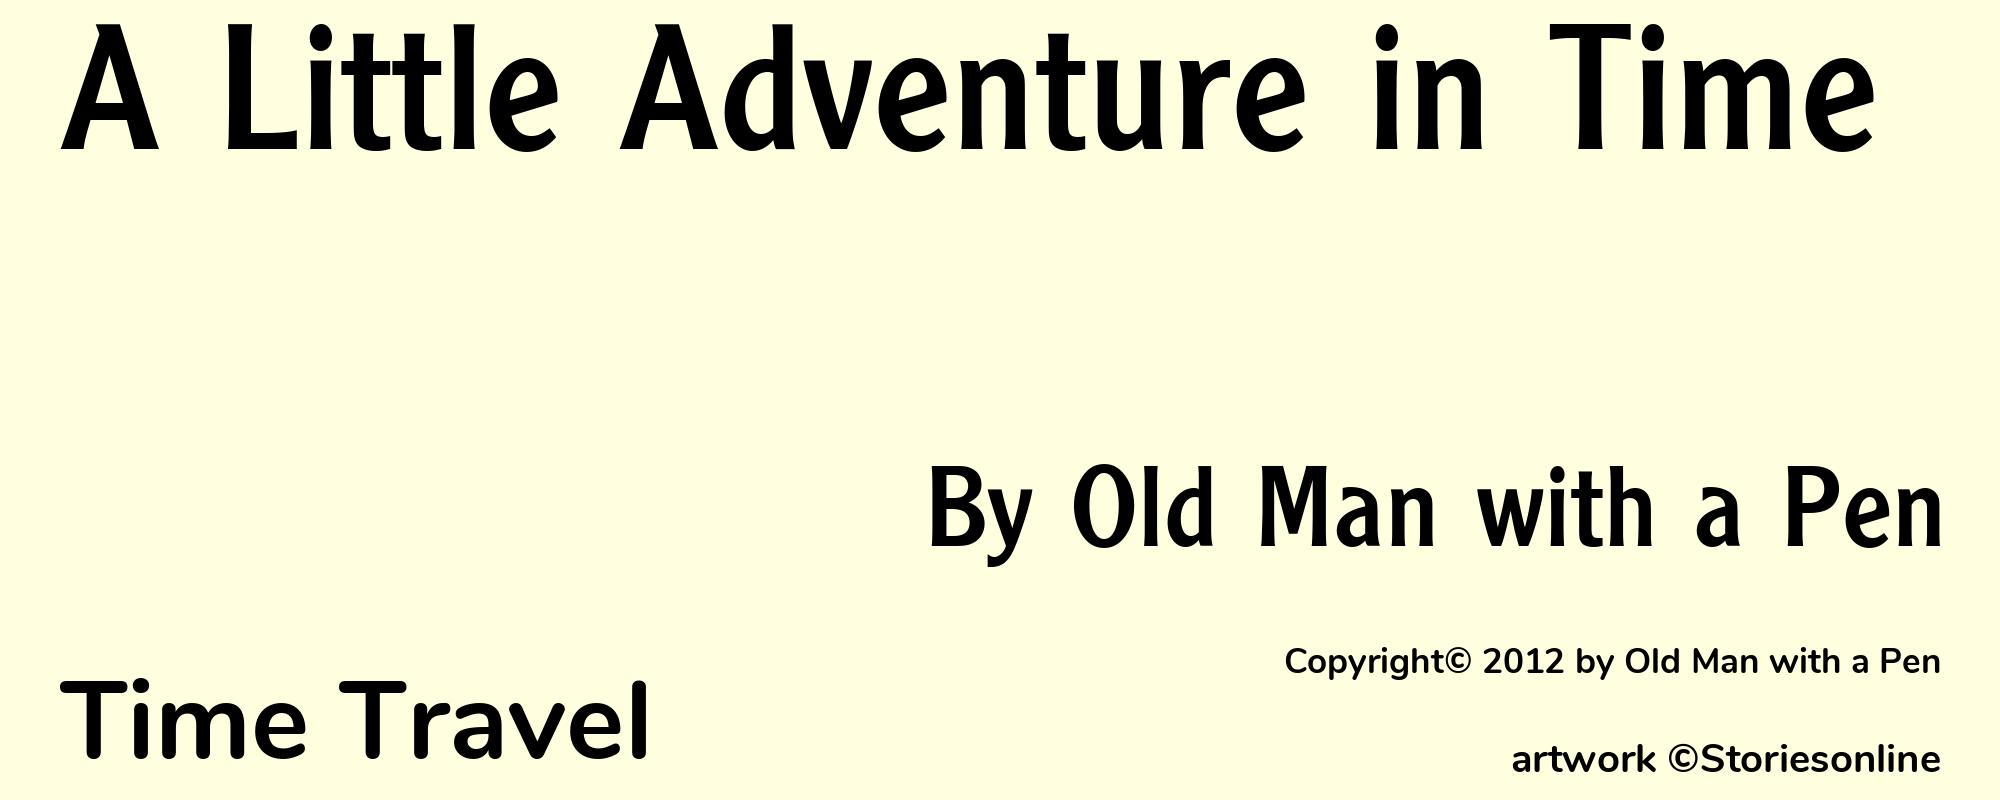 A Little Adventure in Time - Cover